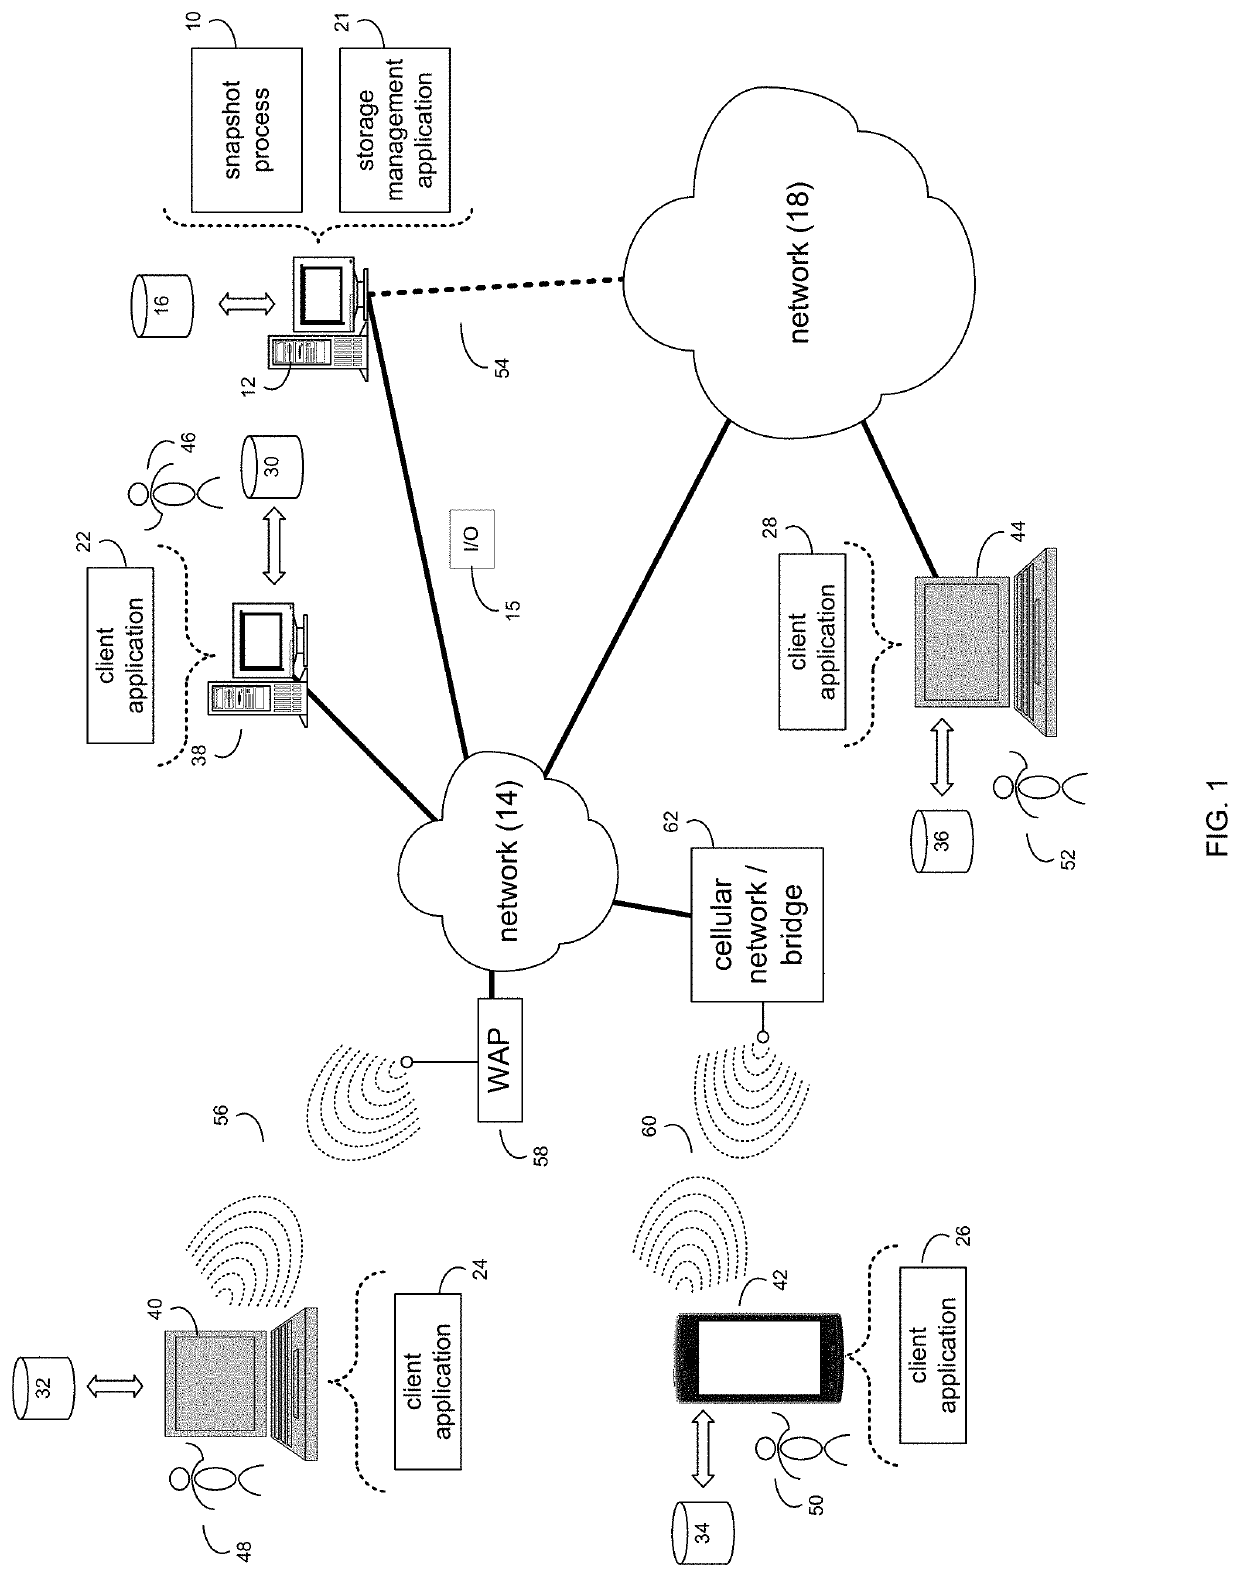 System and method for lazy snapshots for storage cluster with delta log based architecture